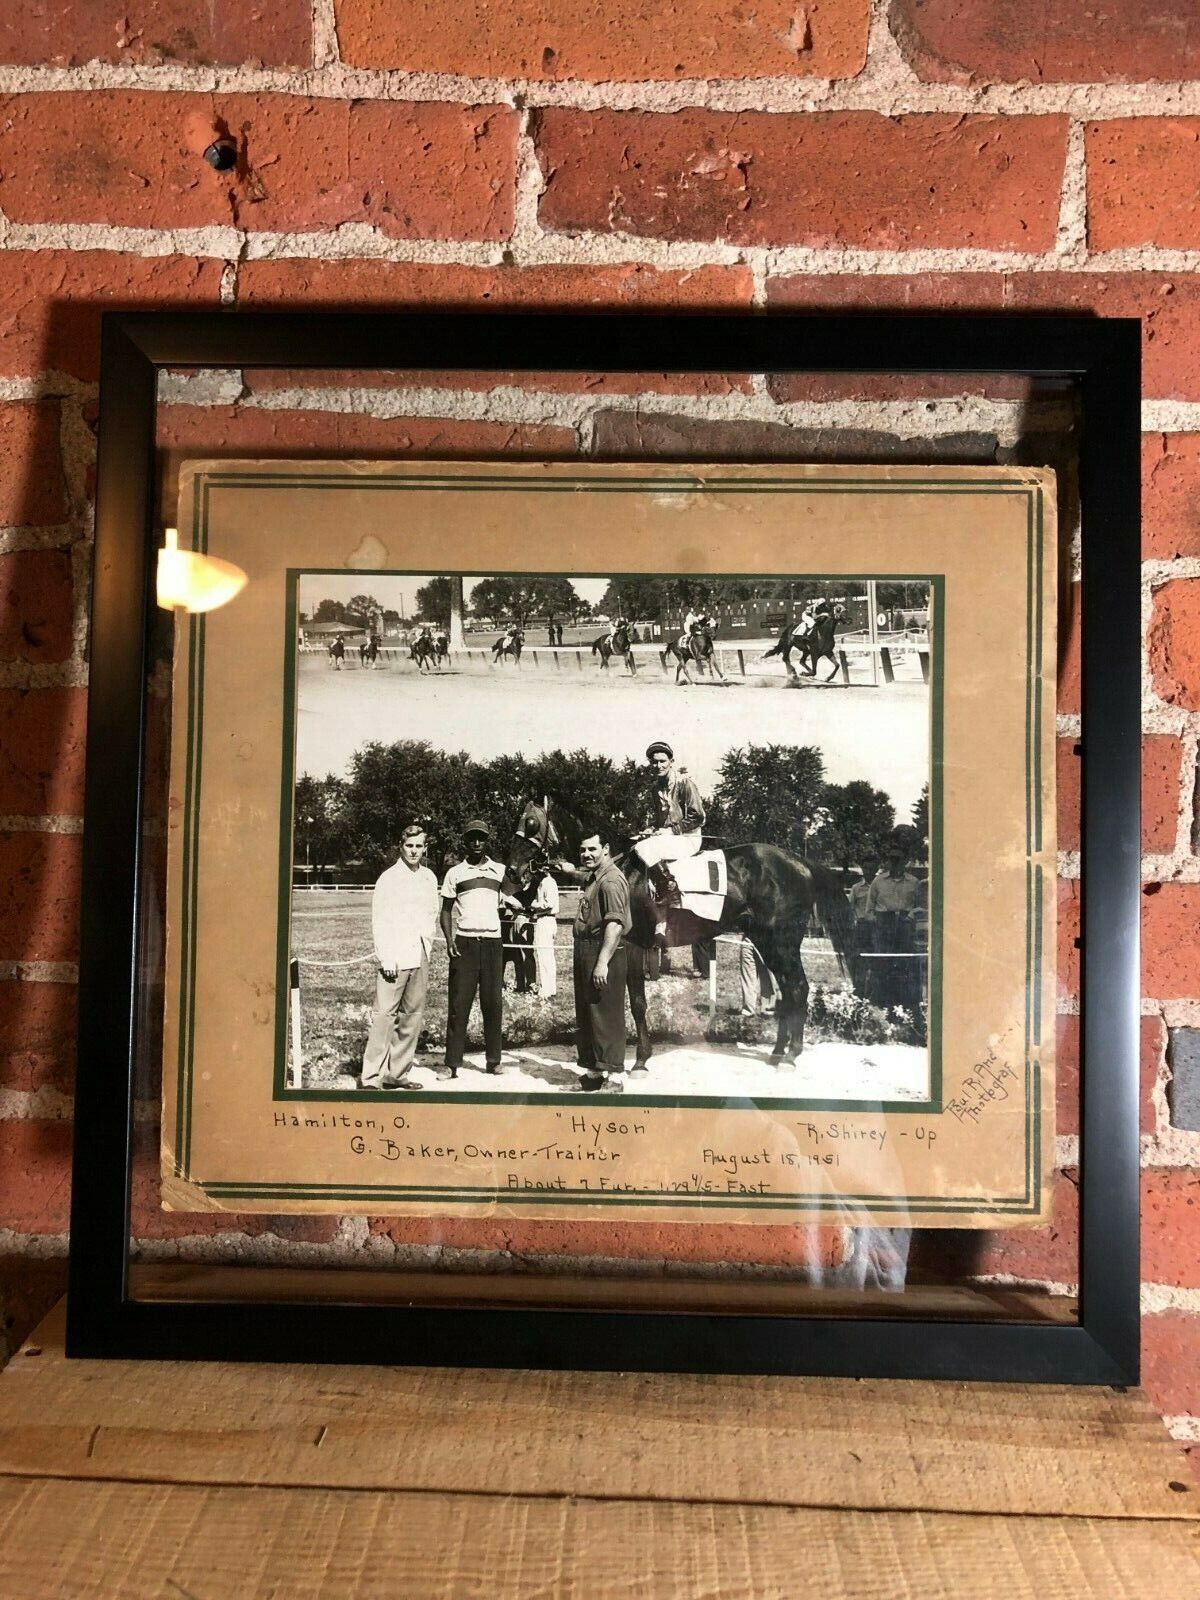 Vintage Horse Racing Photo in New Float Frame Hamilton Ohio August 1951 8" x 10"